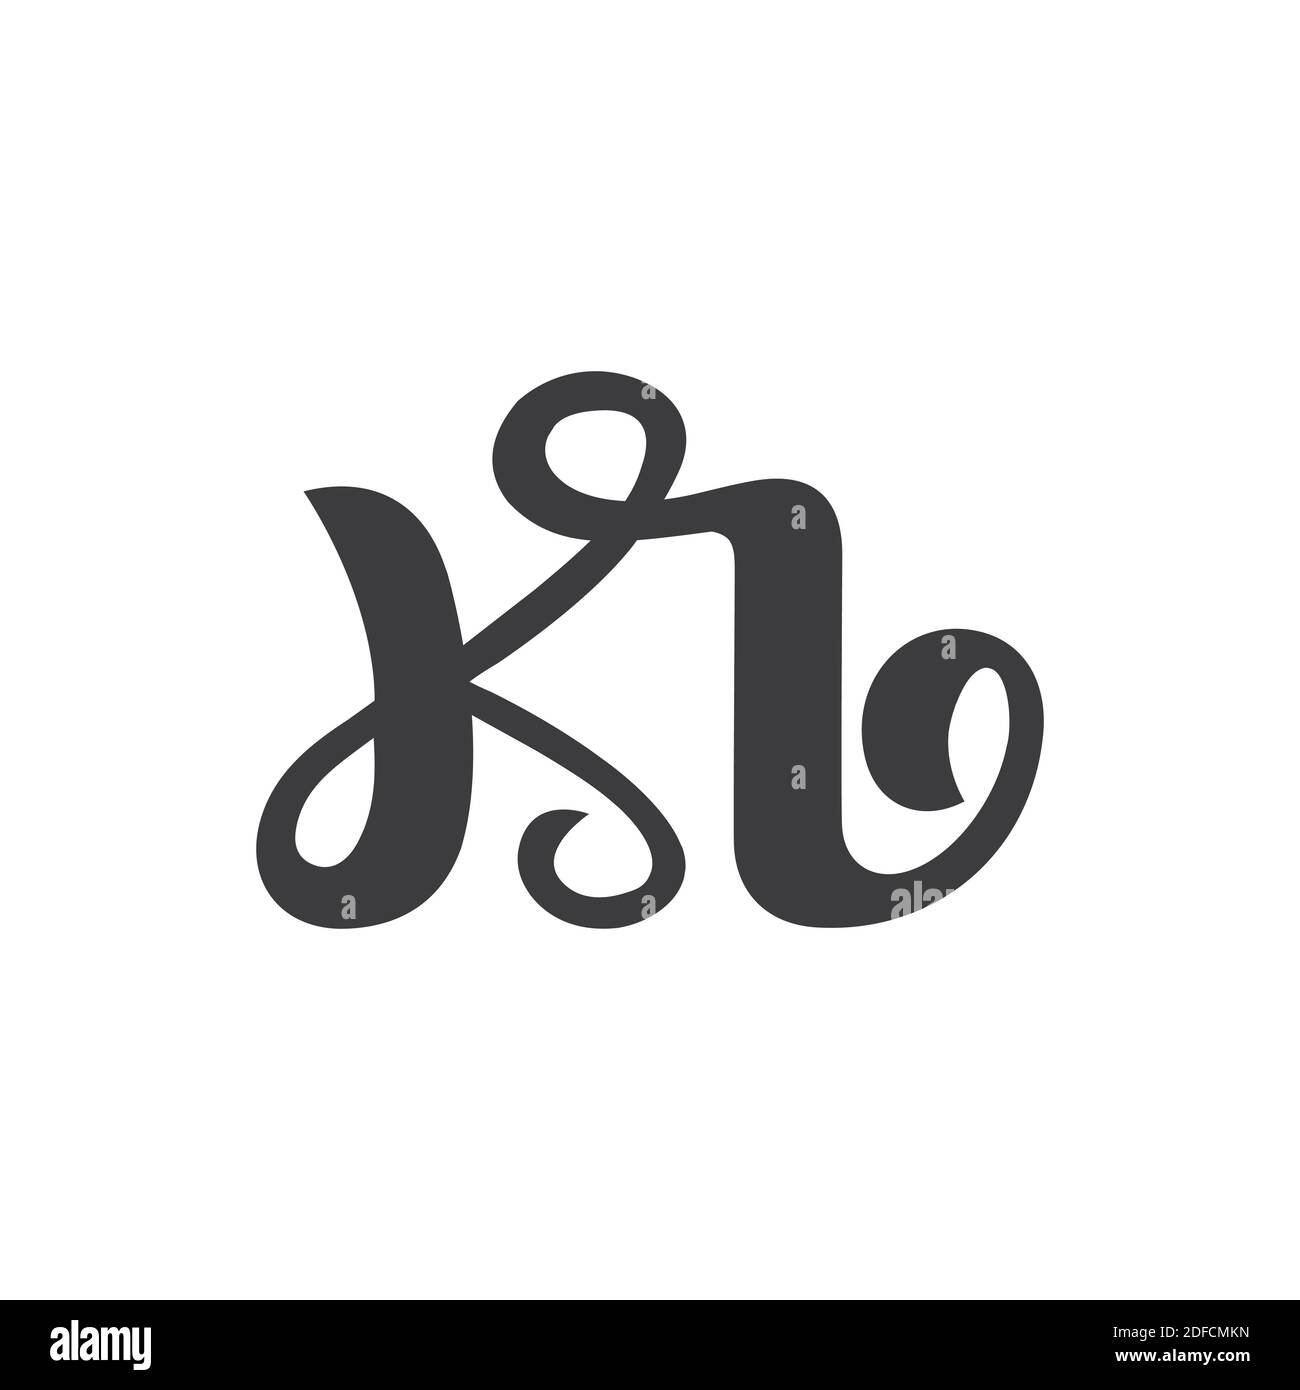 Bkkb Abstract Letters Emblem Monogram Stock Illustration - Download Image  Now - Abstract, Alphabet, Art - iStock